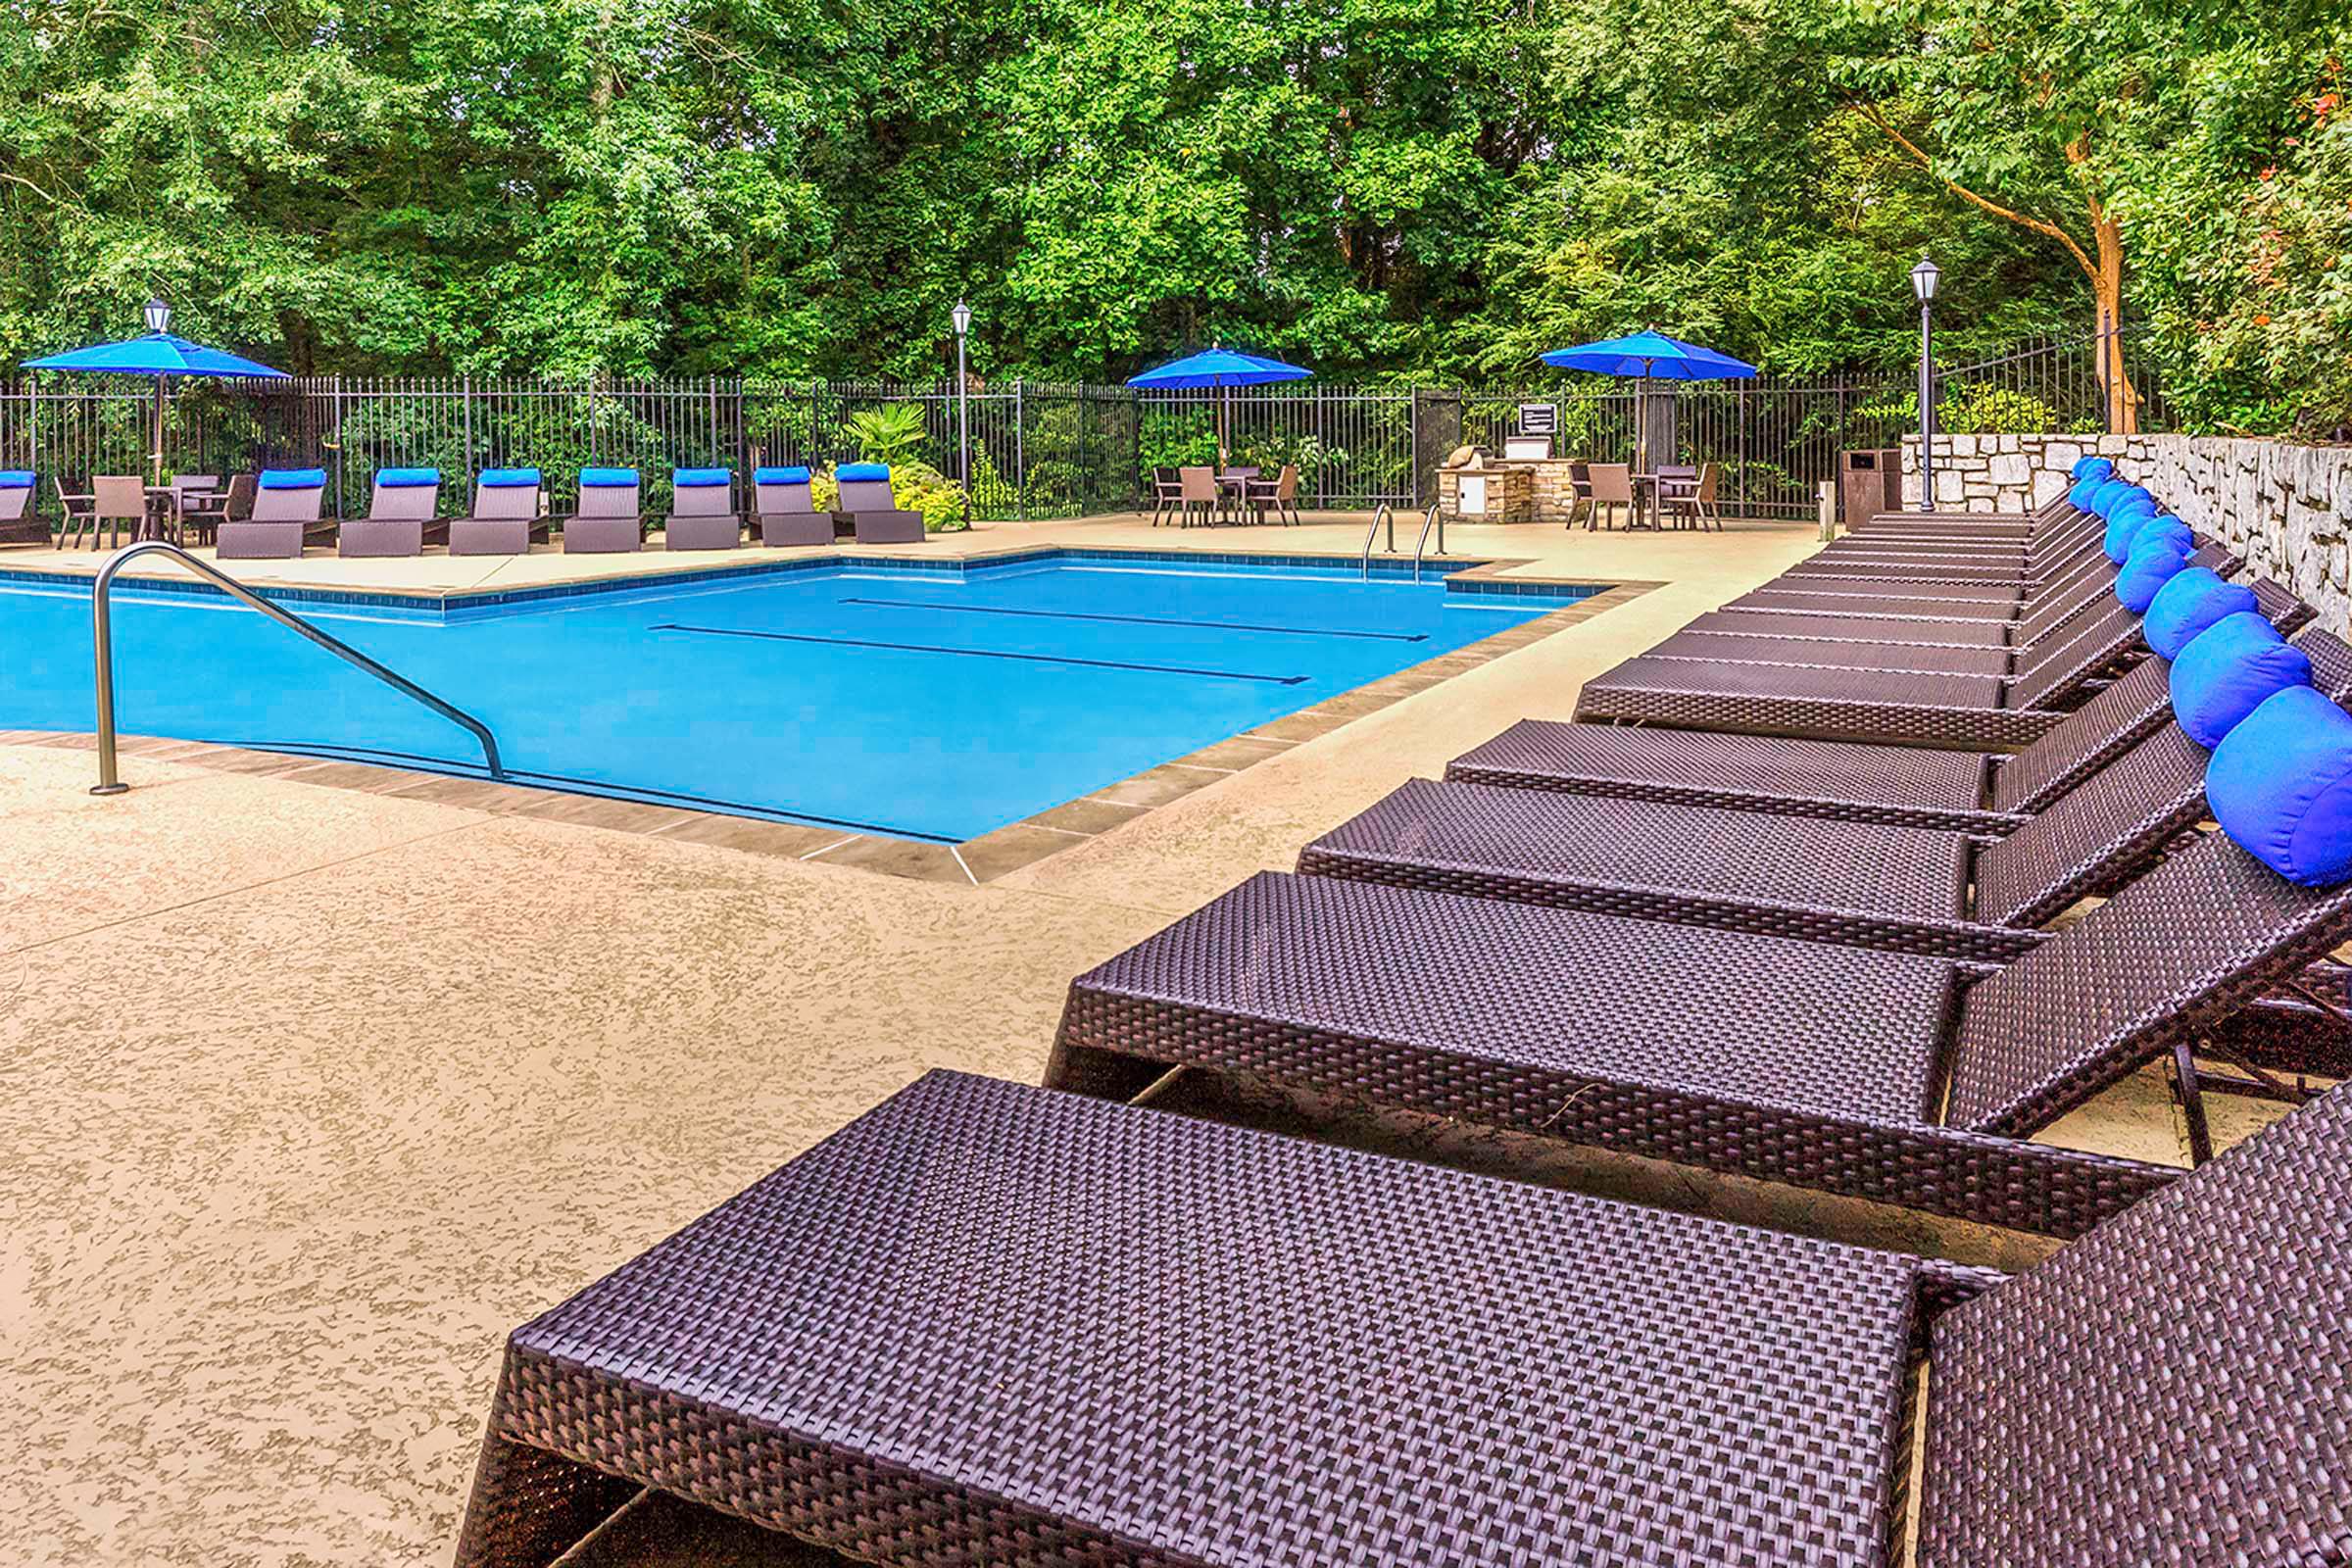 Resort style pool with sundeck for lounging and umbrellas Camden Deerfield Apartments Alpharetta (770)872-6592